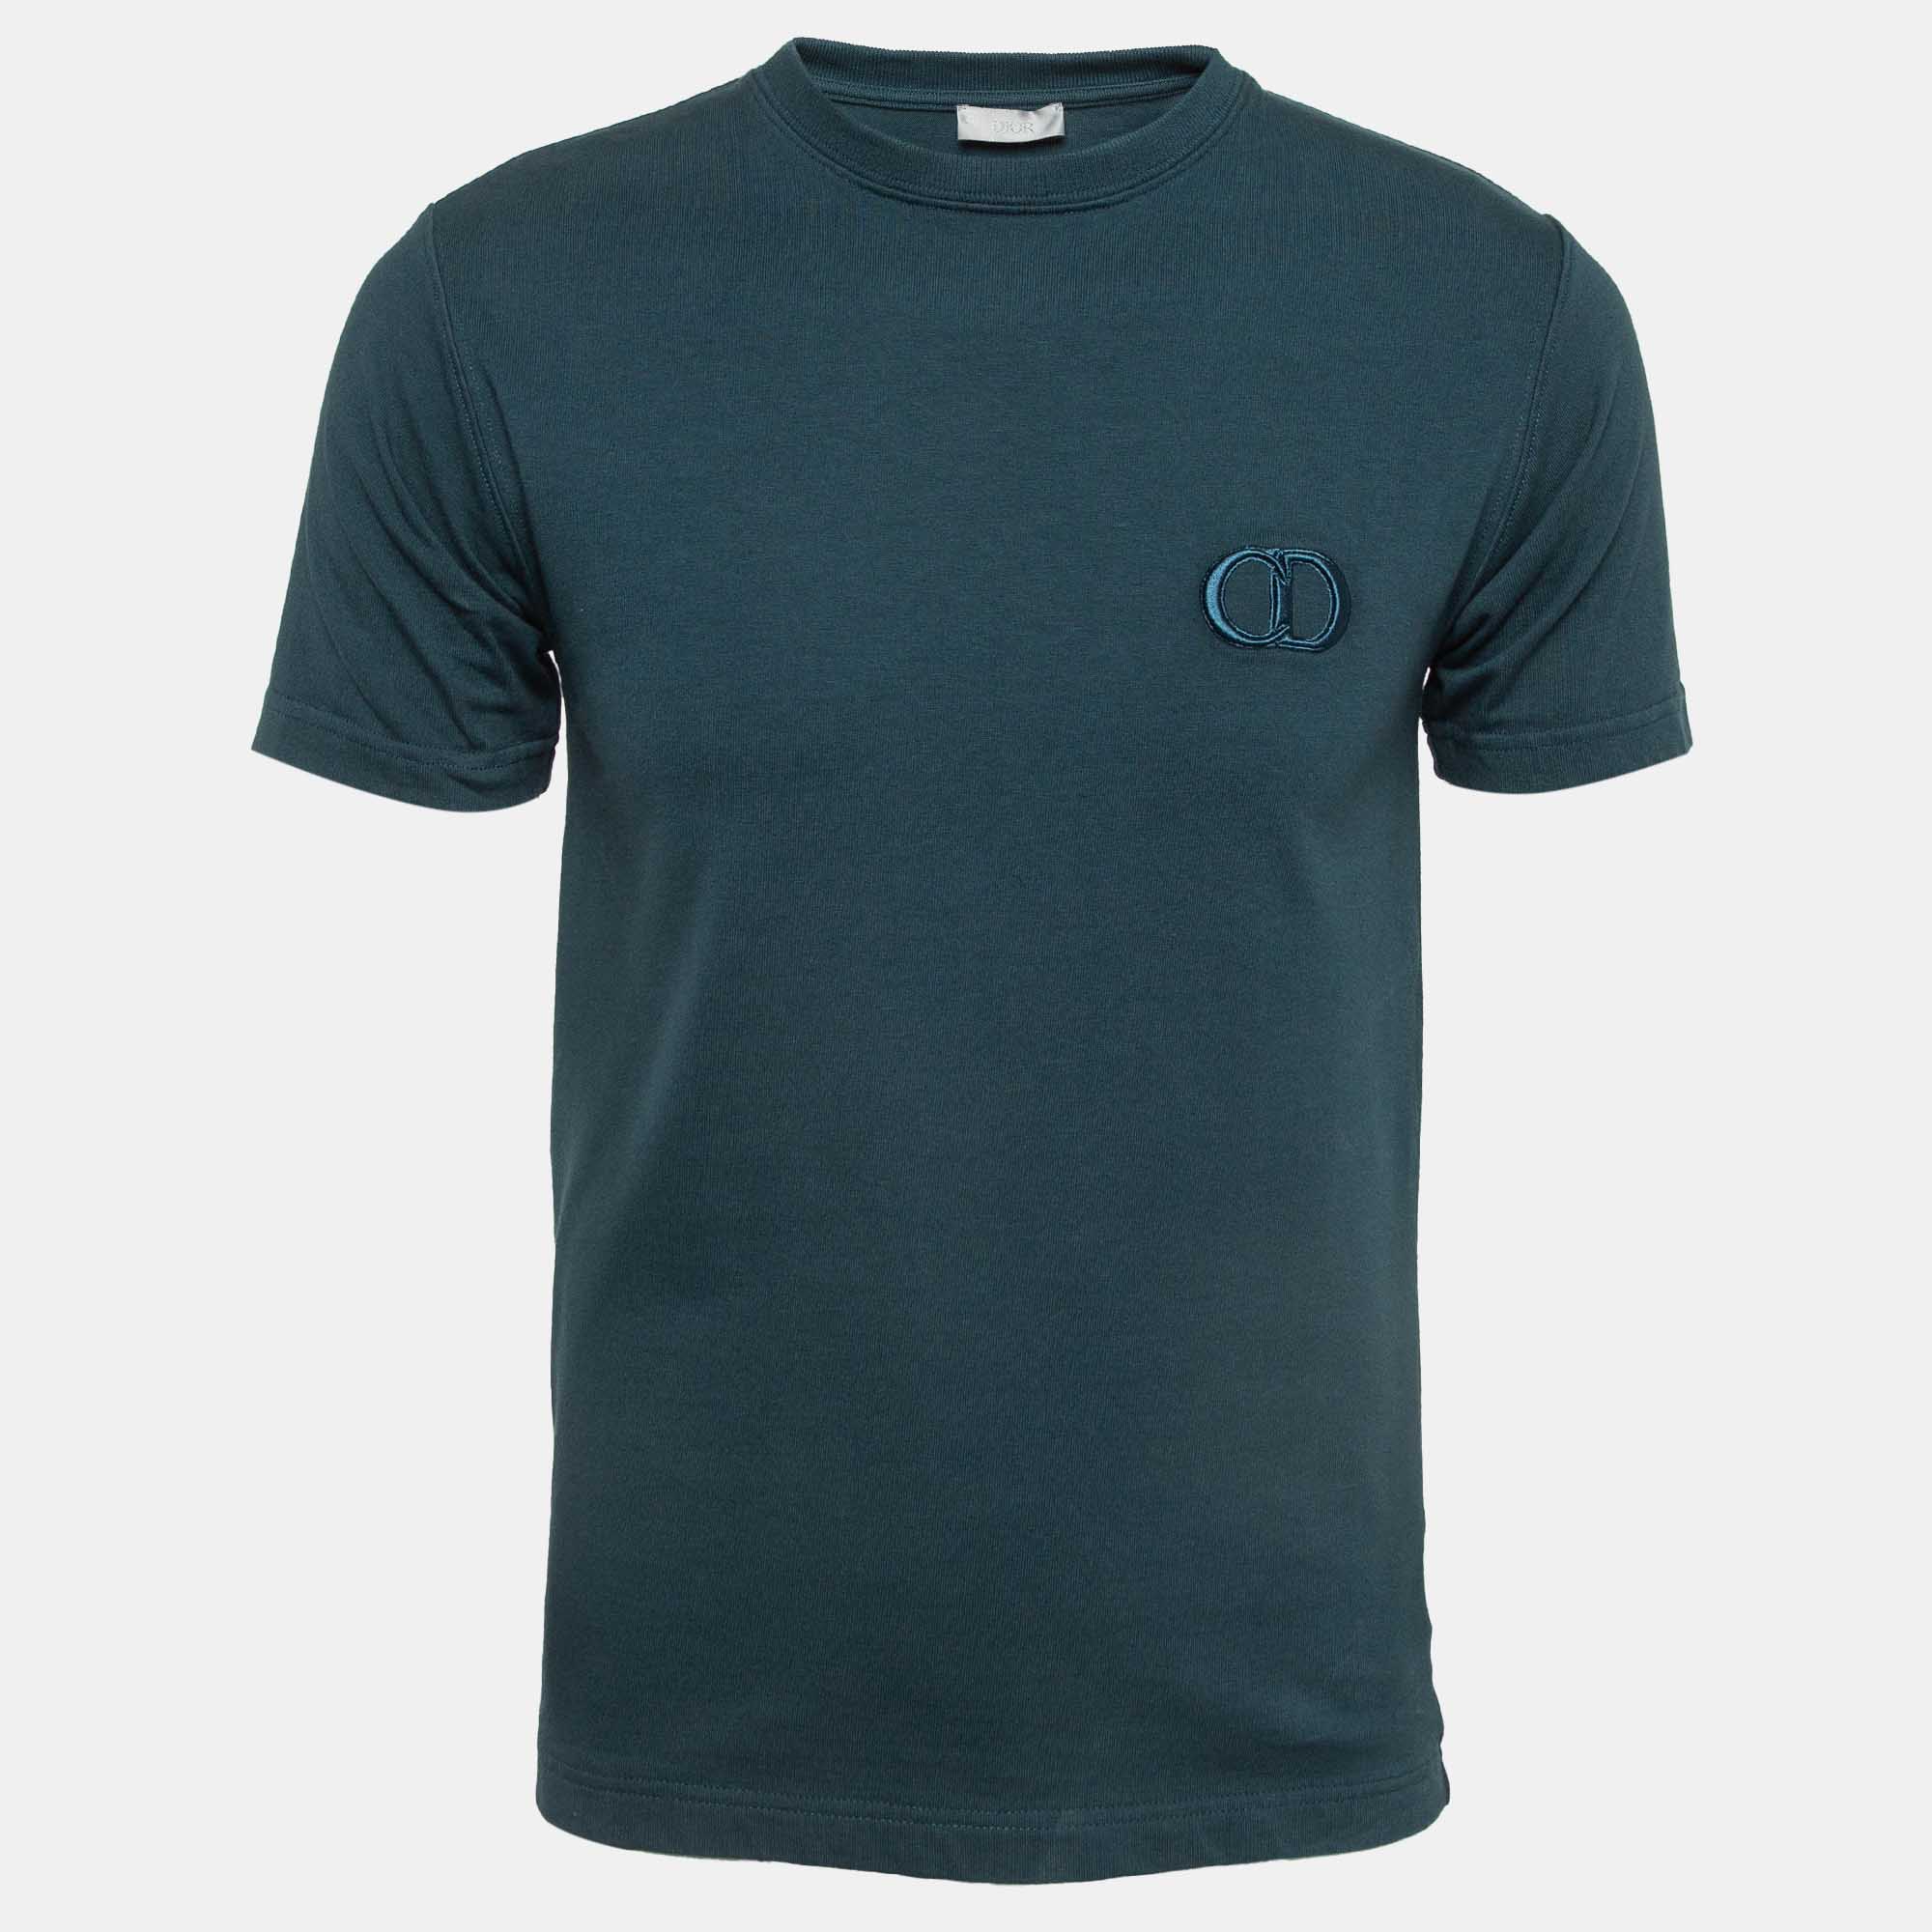 

Dior Homme Teal Blue CD Icon Cotton T-Shirt XS